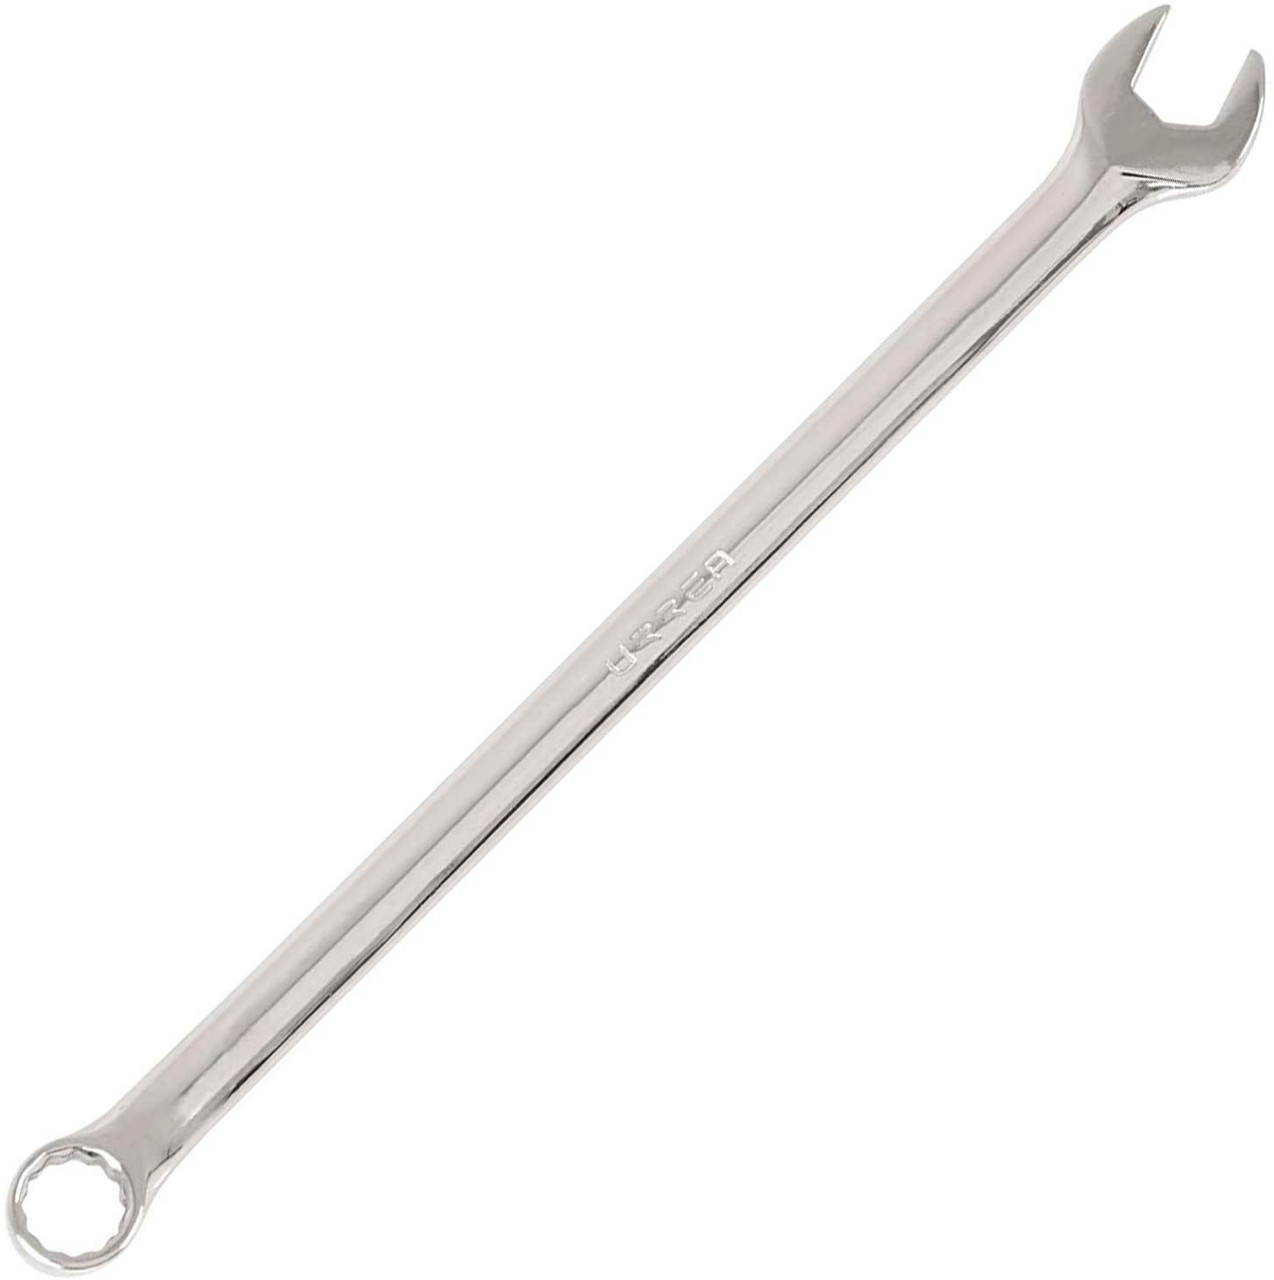 Full polished  Extra Long combination wrench, Size: 13mm, 12 point, Total Length: 8-7/8"